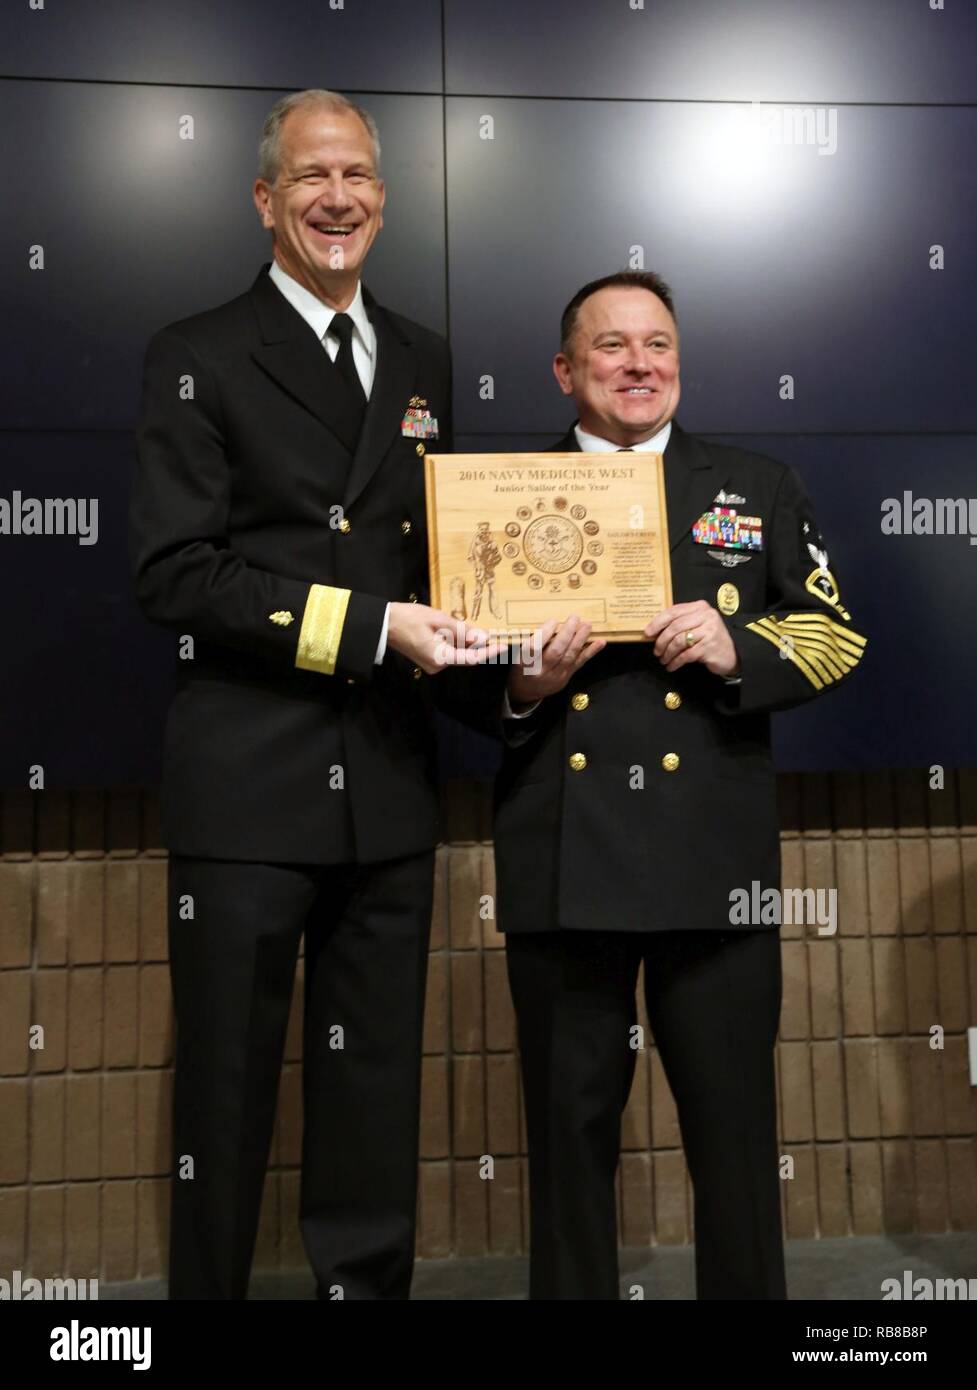 SAN DIEGO (Dec 9, 2016) Master Chief Petty Officer Jeffrey Dell, Command Master Chief, Naval Hospital Oak Harbor, receives a plaque for the Navy Medicine West Junior Sailor of the Year on behalf of Petty Officer 2nd Class Christopher Hough, from Naval Hospital Oak Harbor, in an auditorium packed with Sailors and civilians at Navy Medicine West headquarters.  Rear Adm. Paul Pearigen, Commander Navy Medicine West (left) presented the plaque.  ( Stock Photo